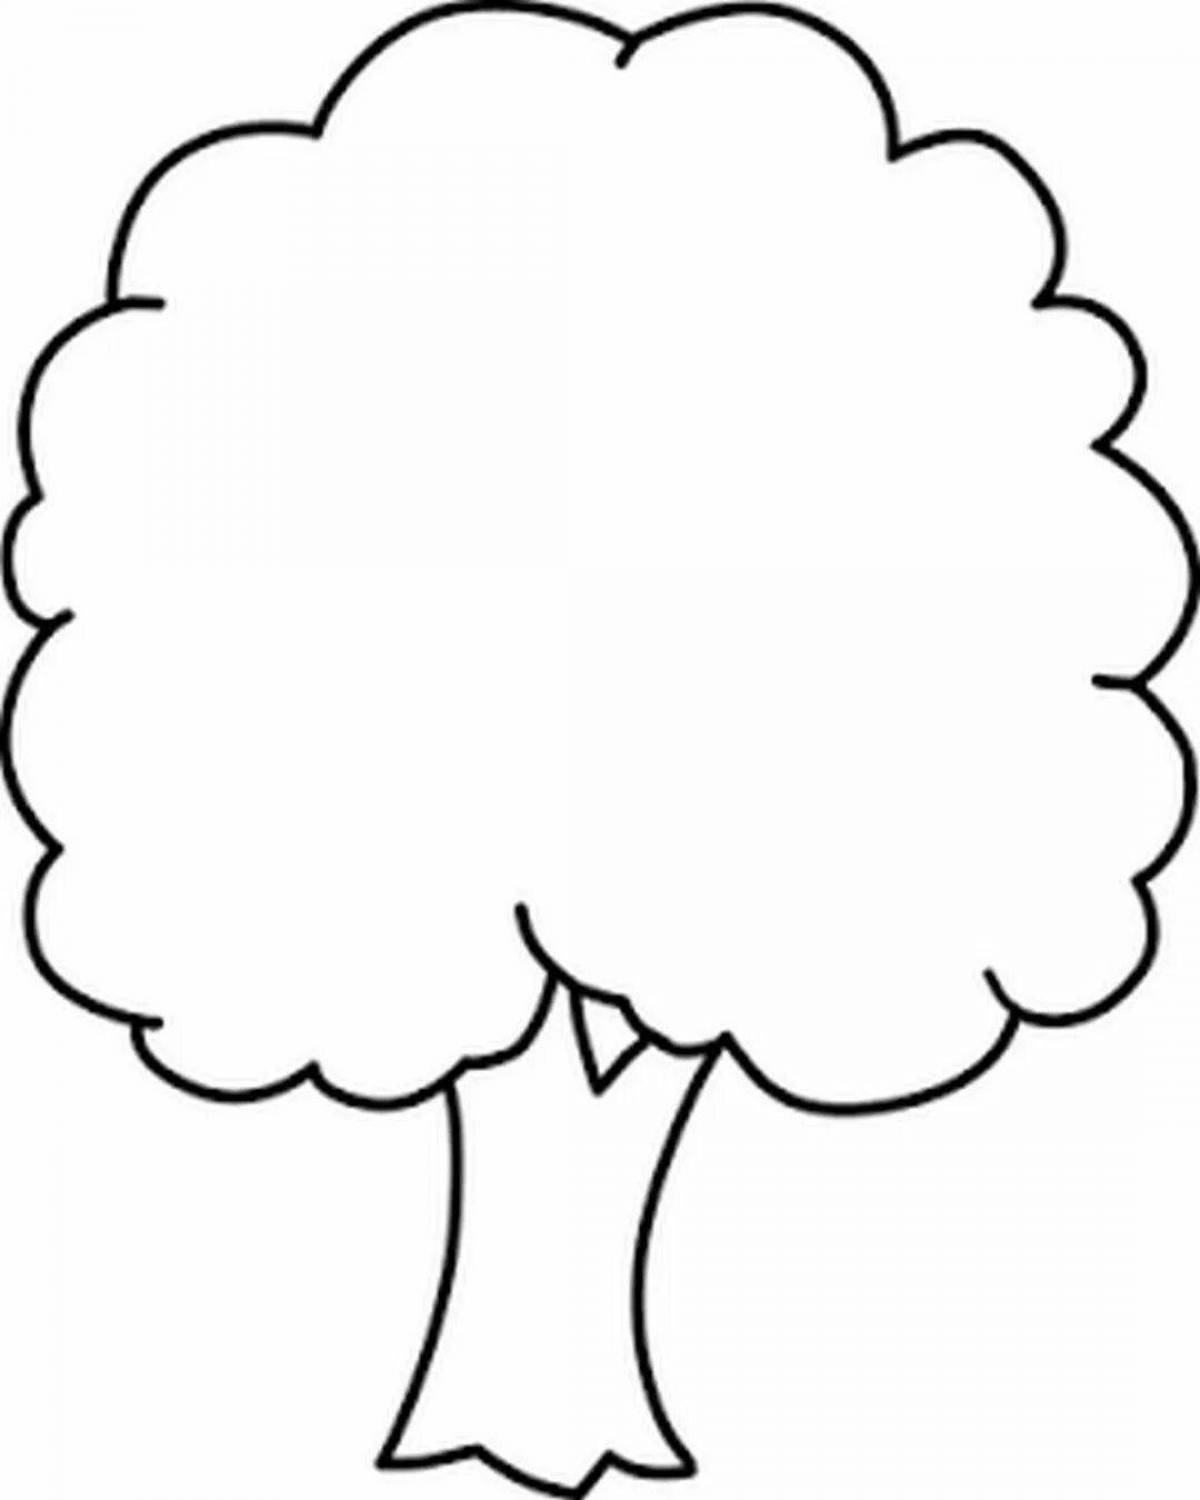 Coloring book silhouette of a huge tree